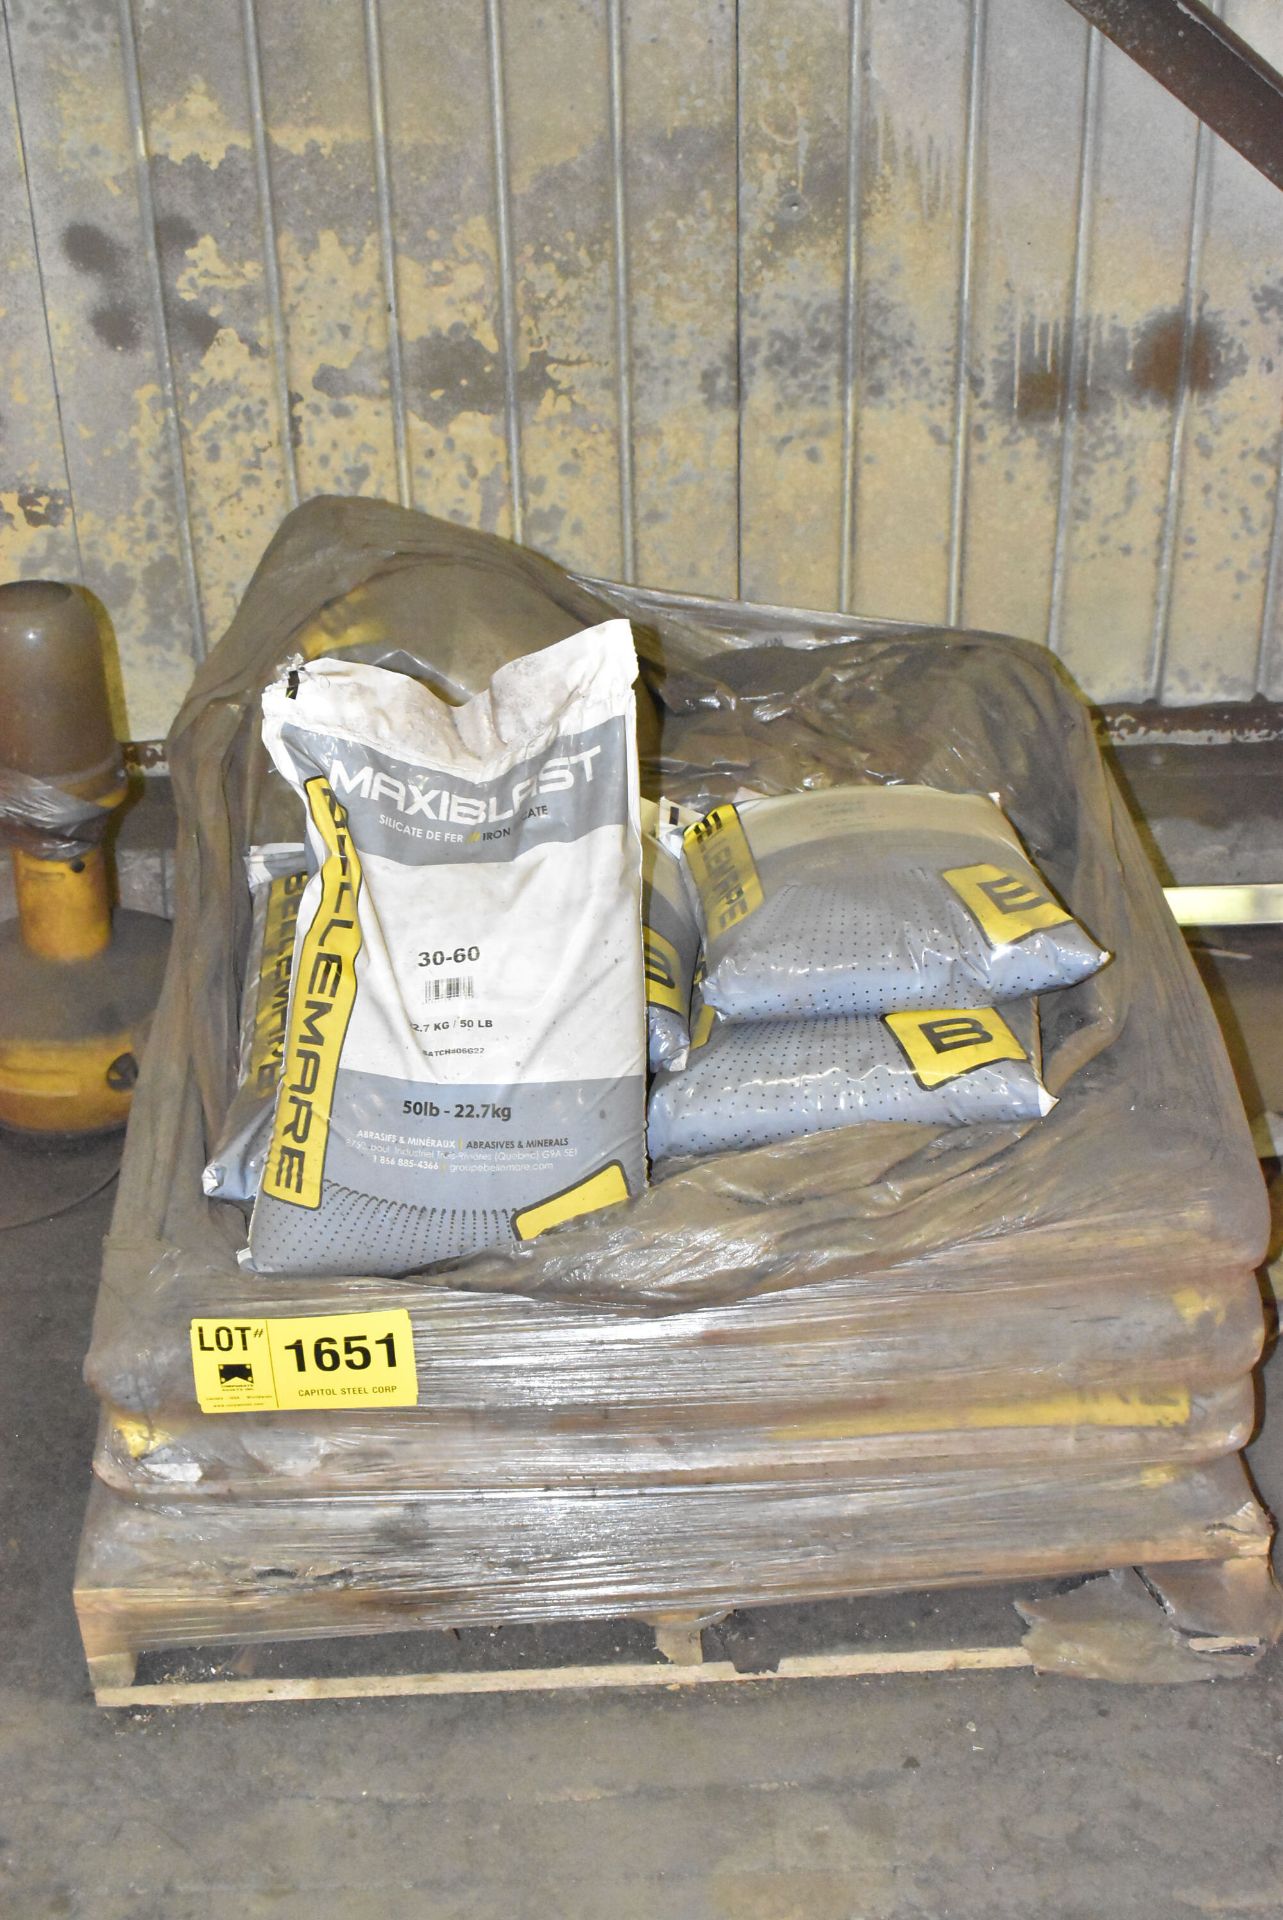 LOT/ PARTIAL SKIDS OF BELLEMARE MAXI BLAST 30-60 SAND BLASTING MEDIA [RIGGING FEES FOR LOT #